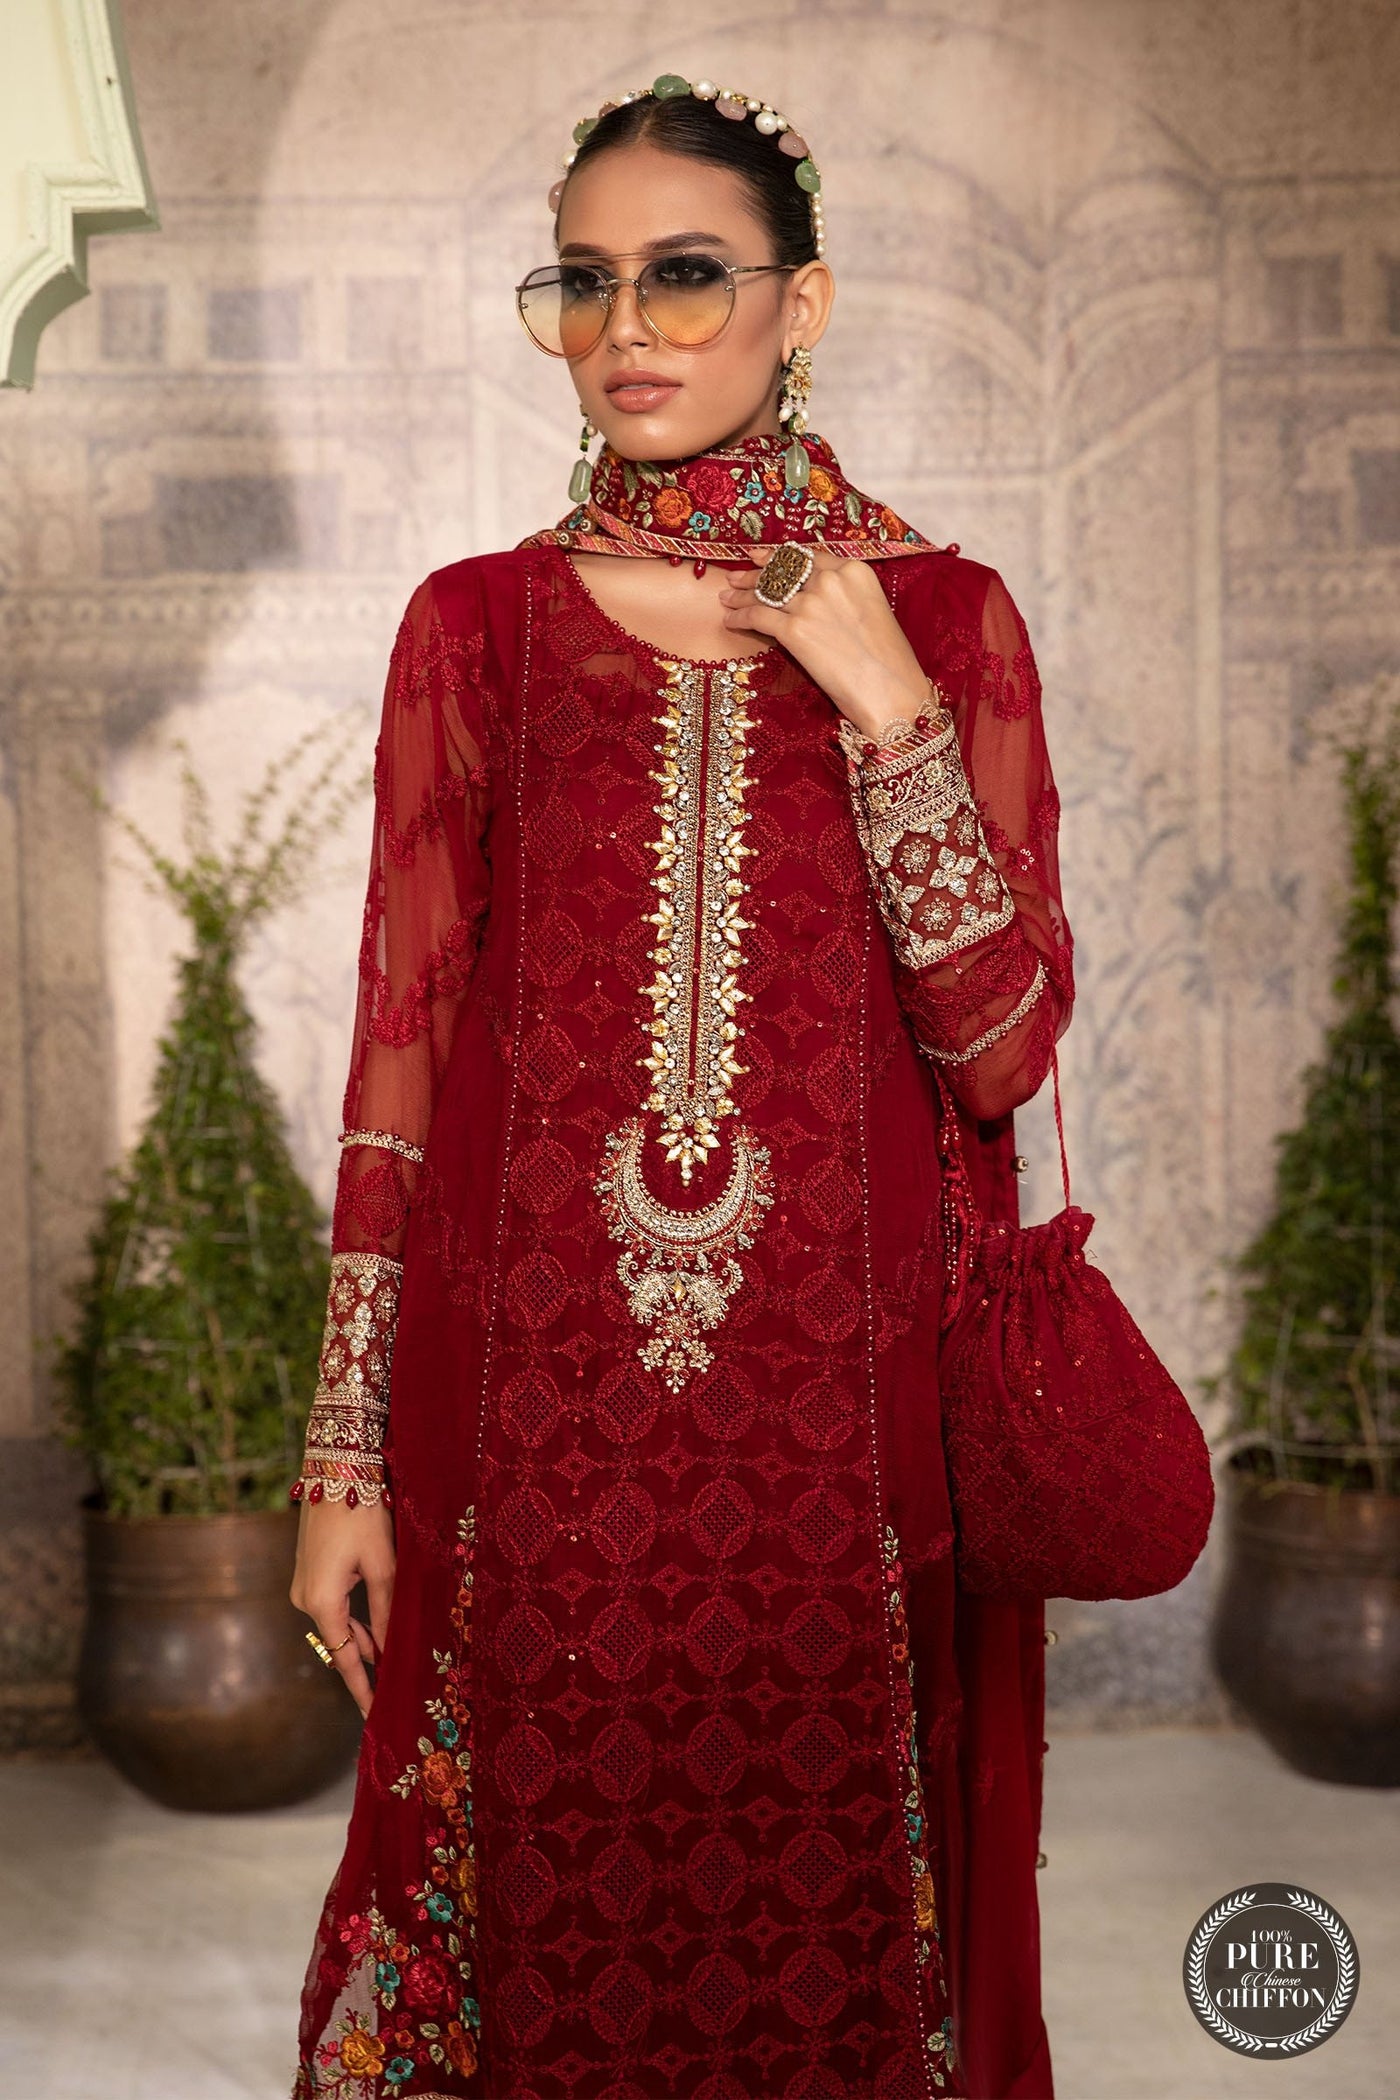 Maria. B 3 Piece Unstitched Embroidered Pure Chiffon Suit - MPC-22-201-Ruby Red